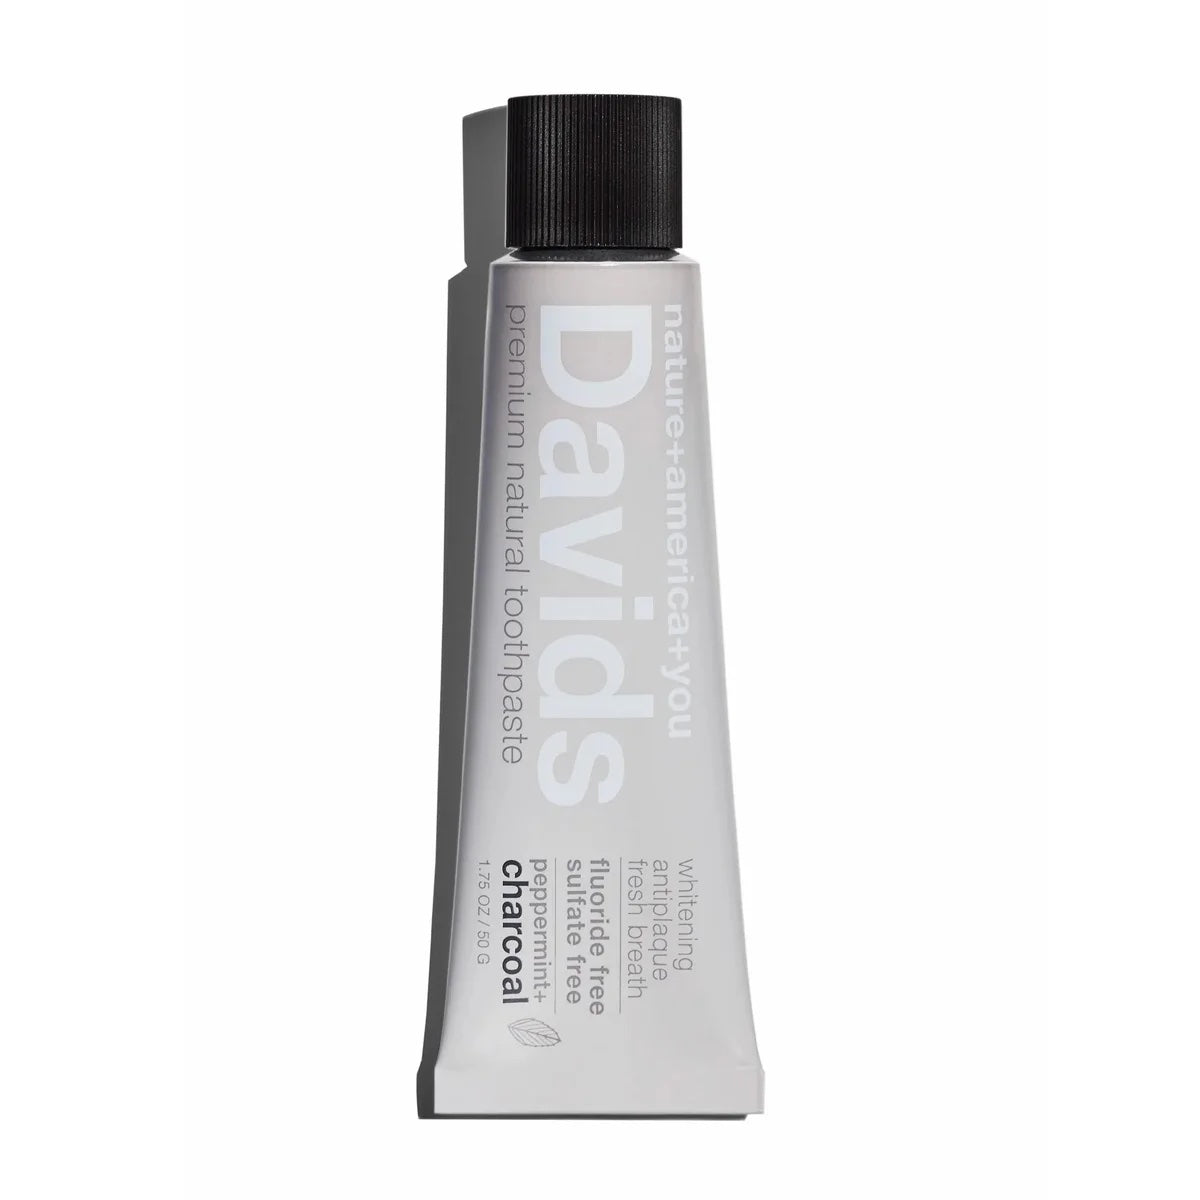 Davids Toothpaste - Peppermint + Charcoal